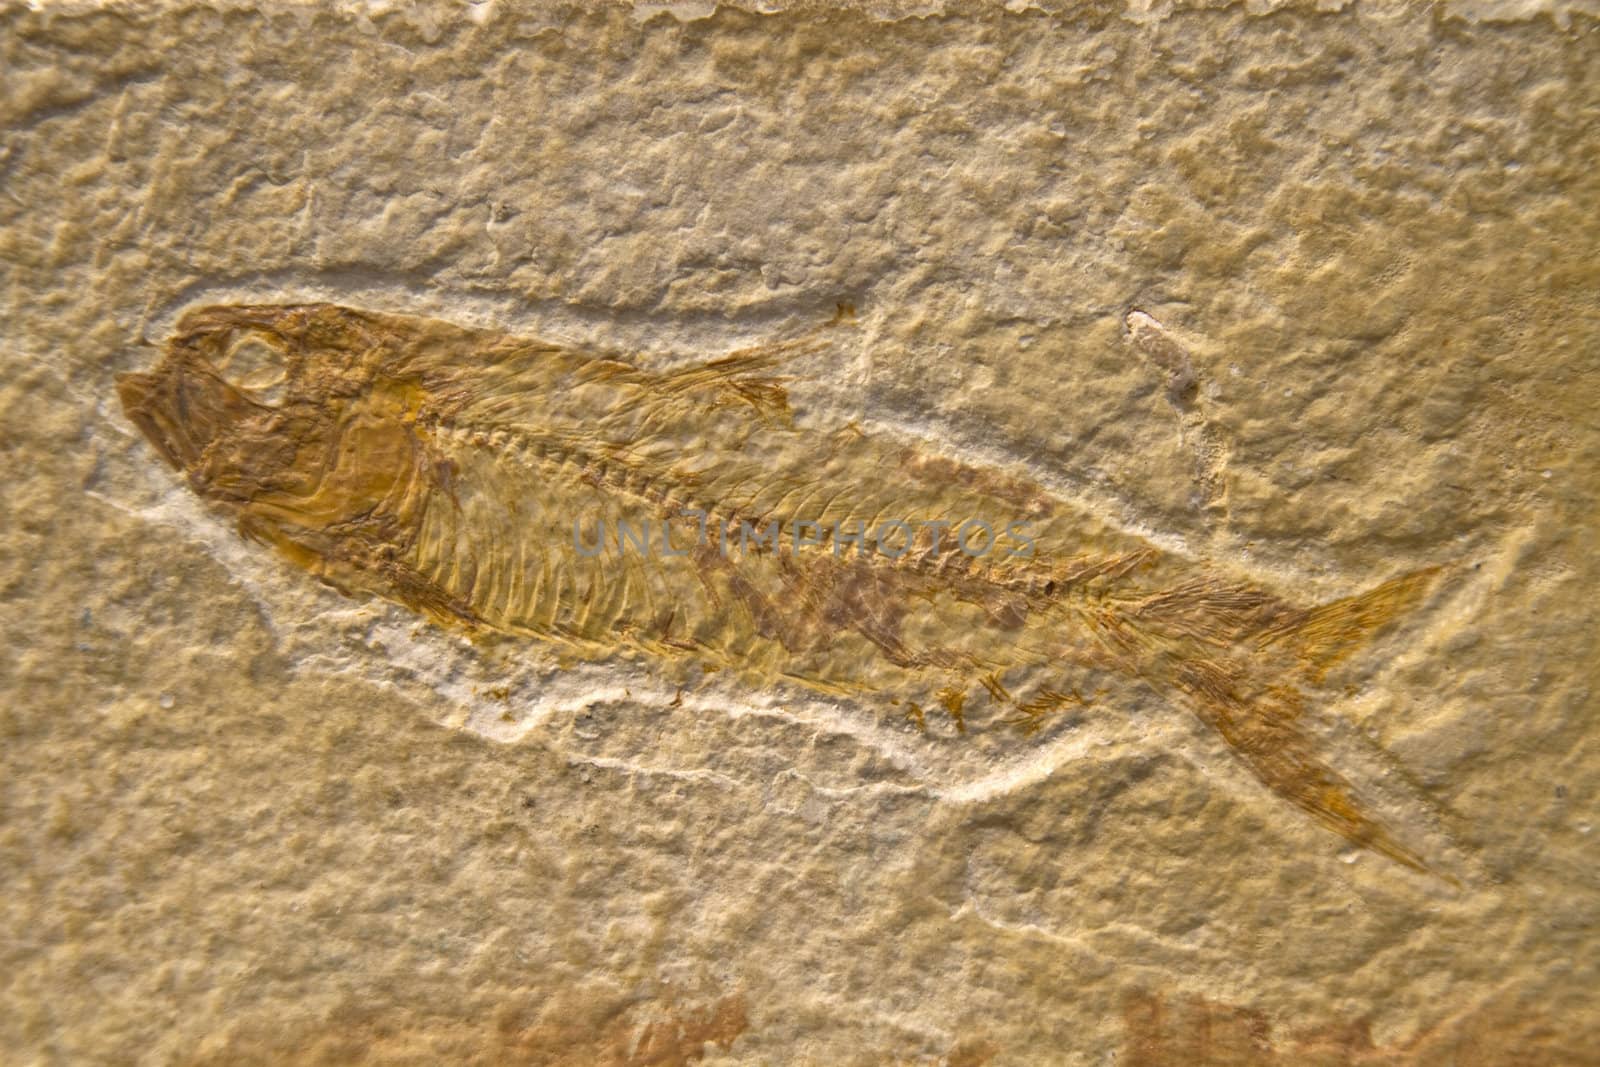 Fossilized Fish from Fossil Lake Area near Kemmerer, Wyoming USA.